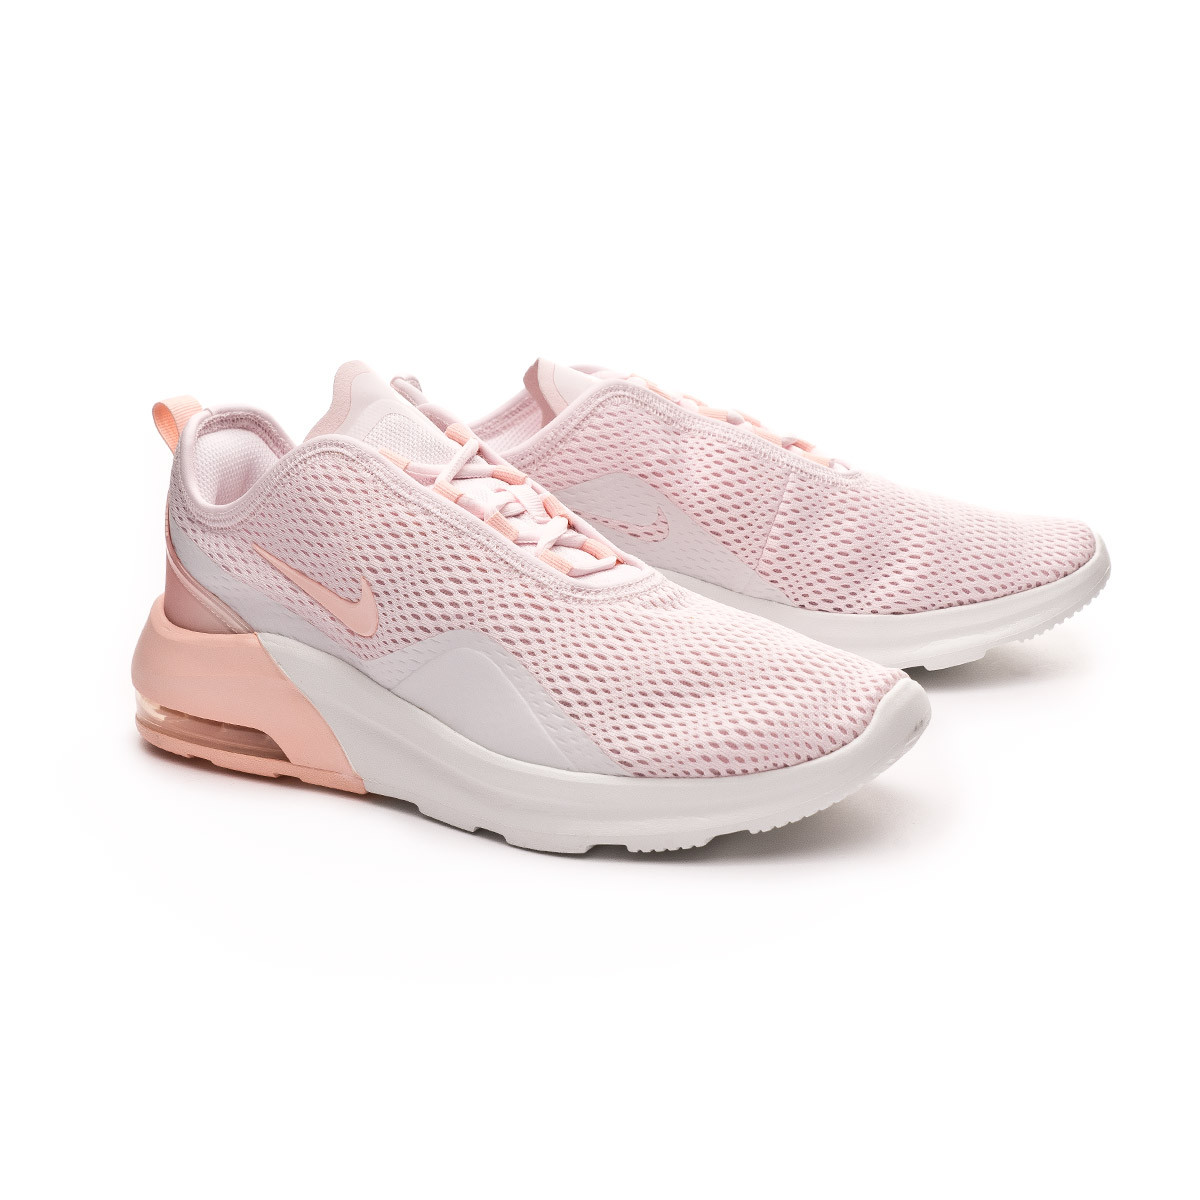 Trainers Nike Air Max Motion 2 Pale pink-Washed coral-Pale ivory - Football  store Fútbol Emotion